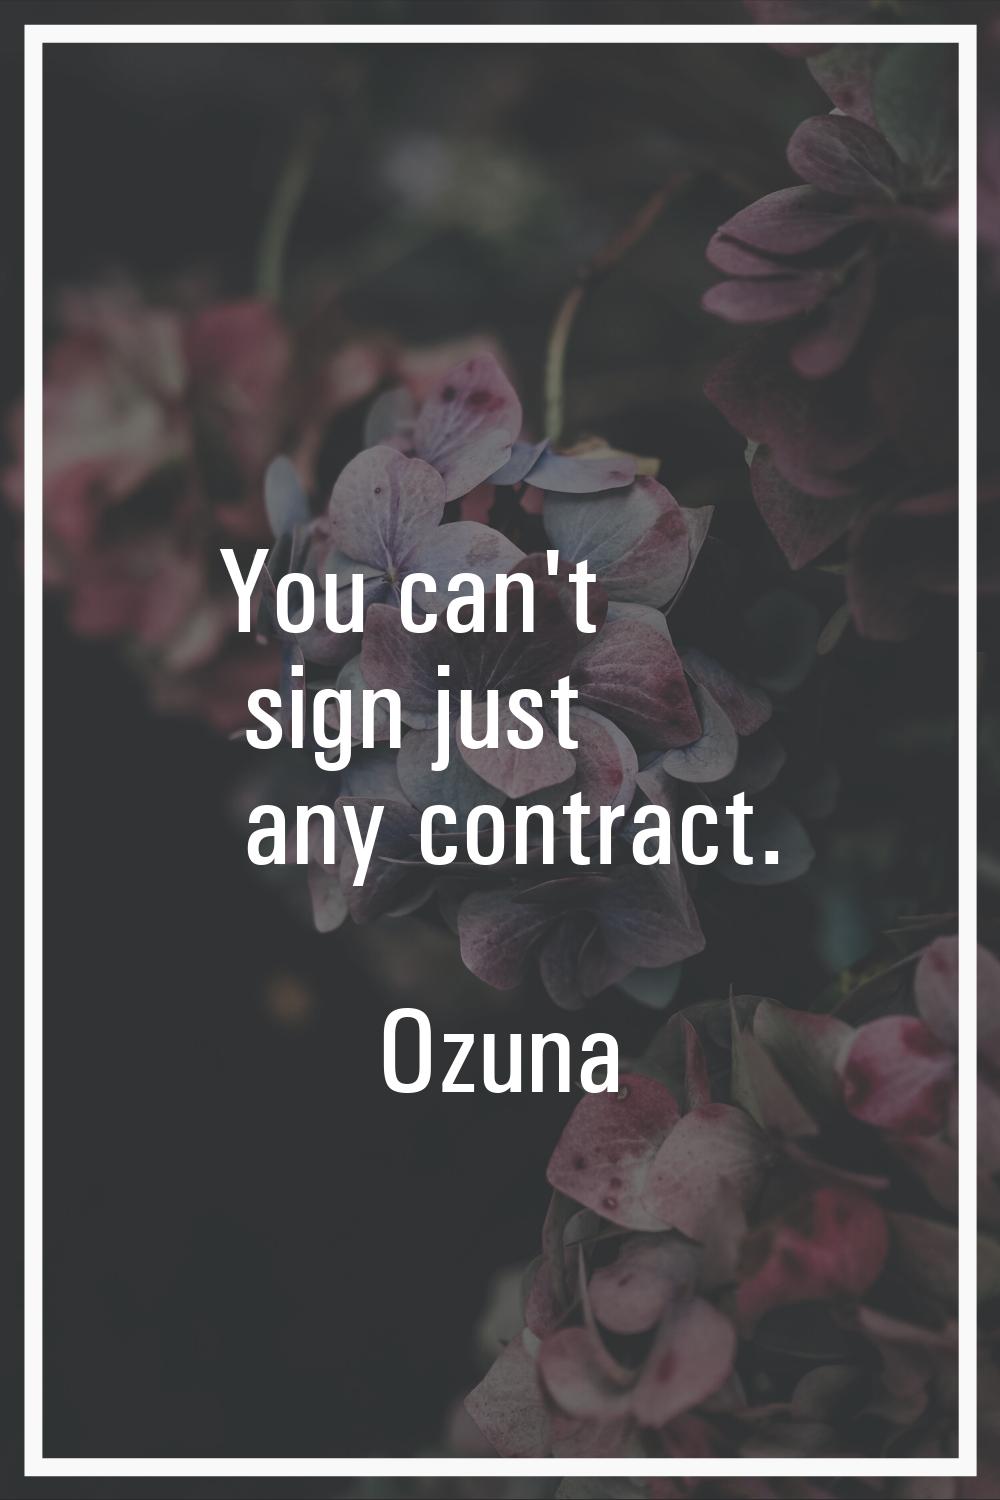 You can't sign just any contract.